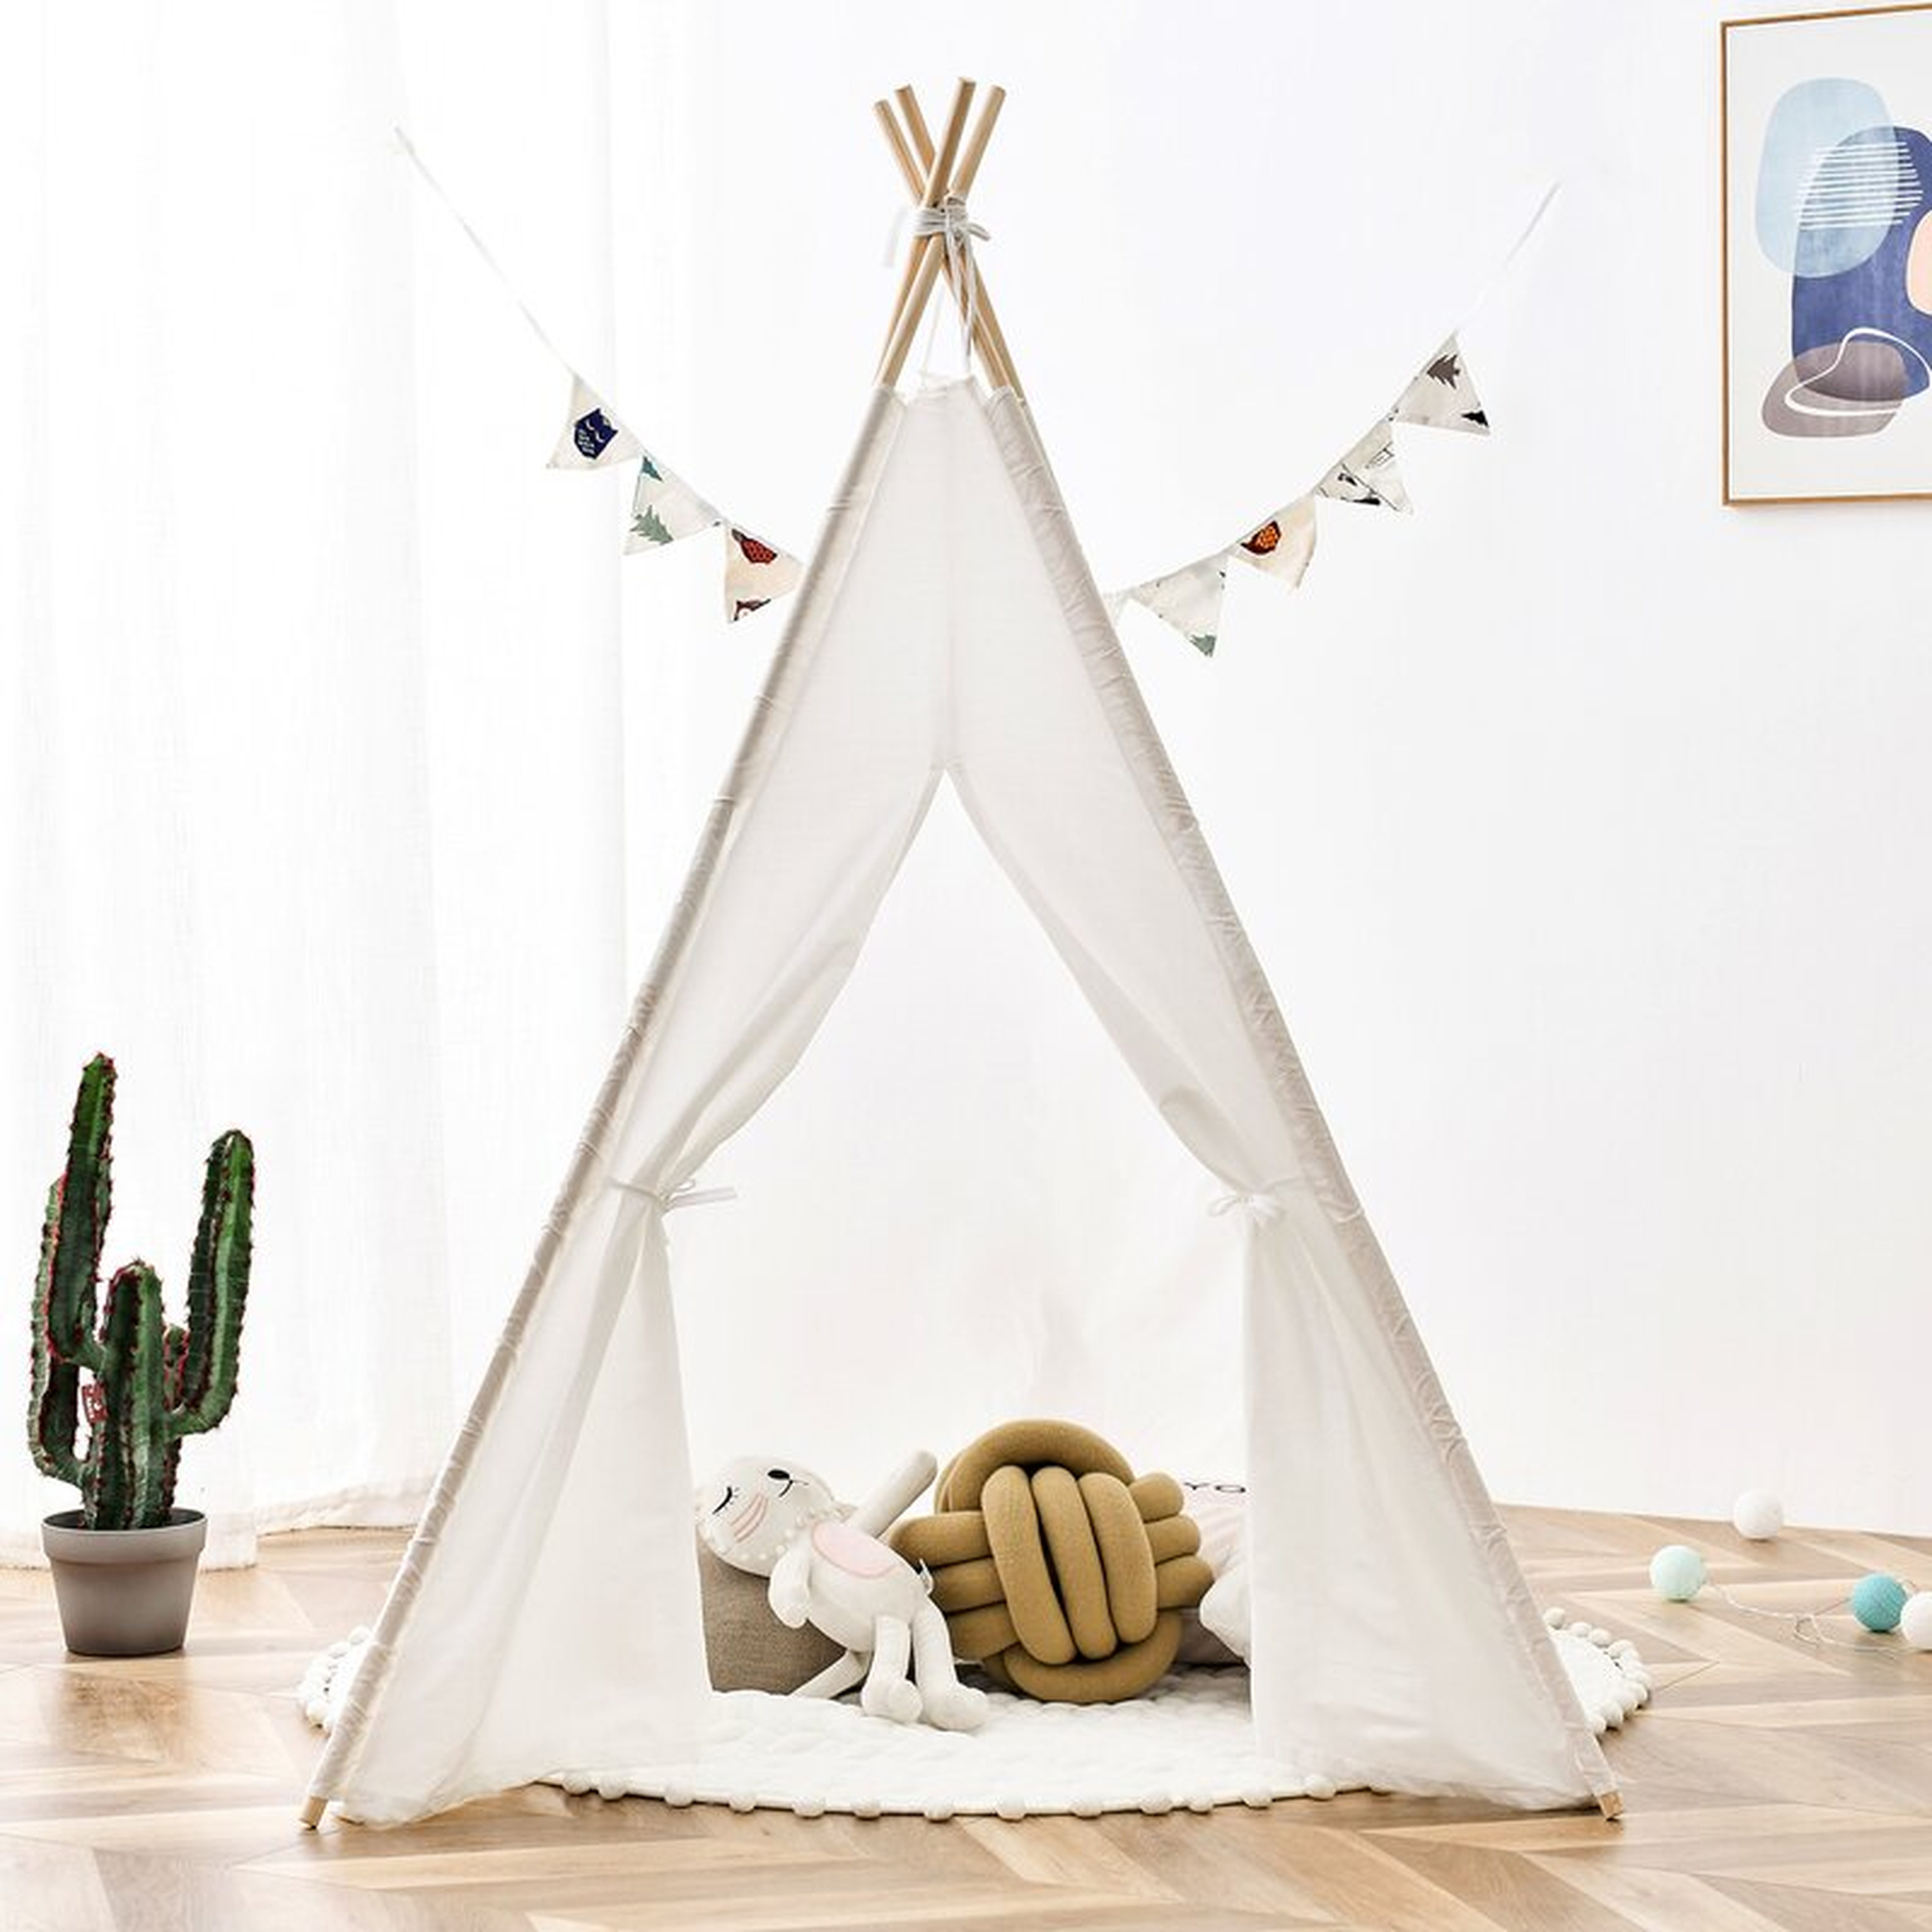 Ournature Indoor/Outdoor Triangular Play Tent with Carrying Bag - Wayfair